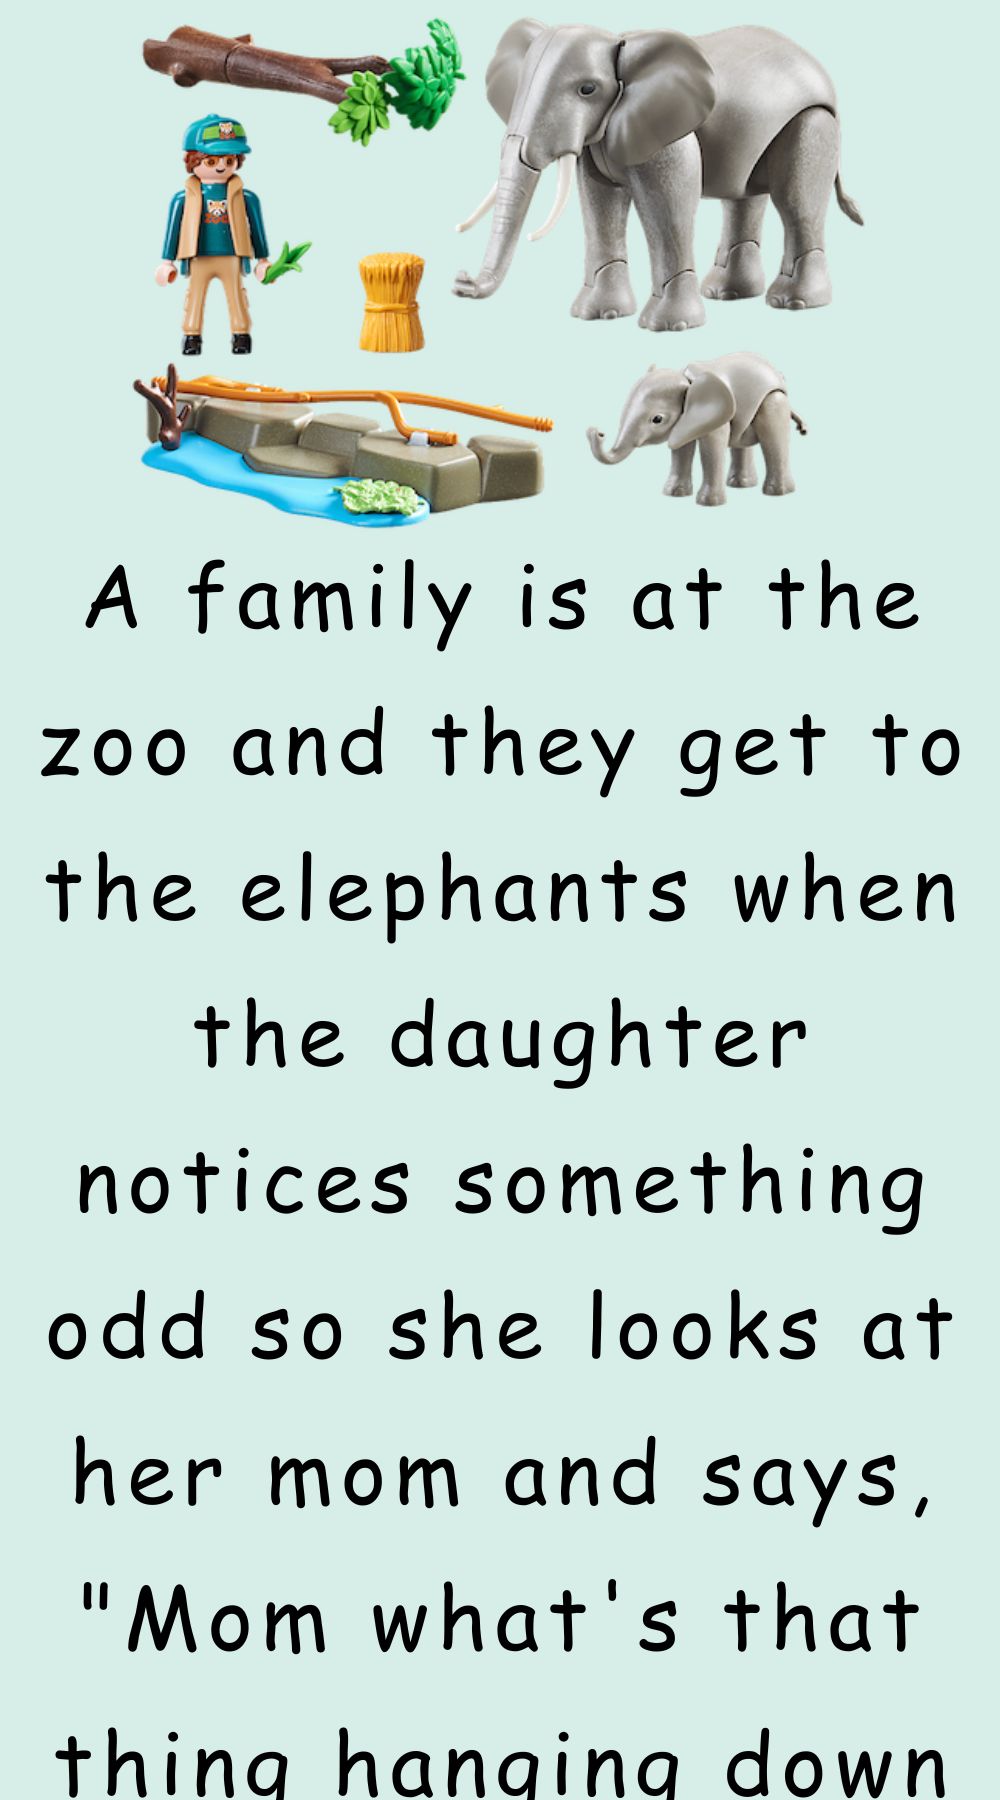 A family is at the zoo and they get to the elephants